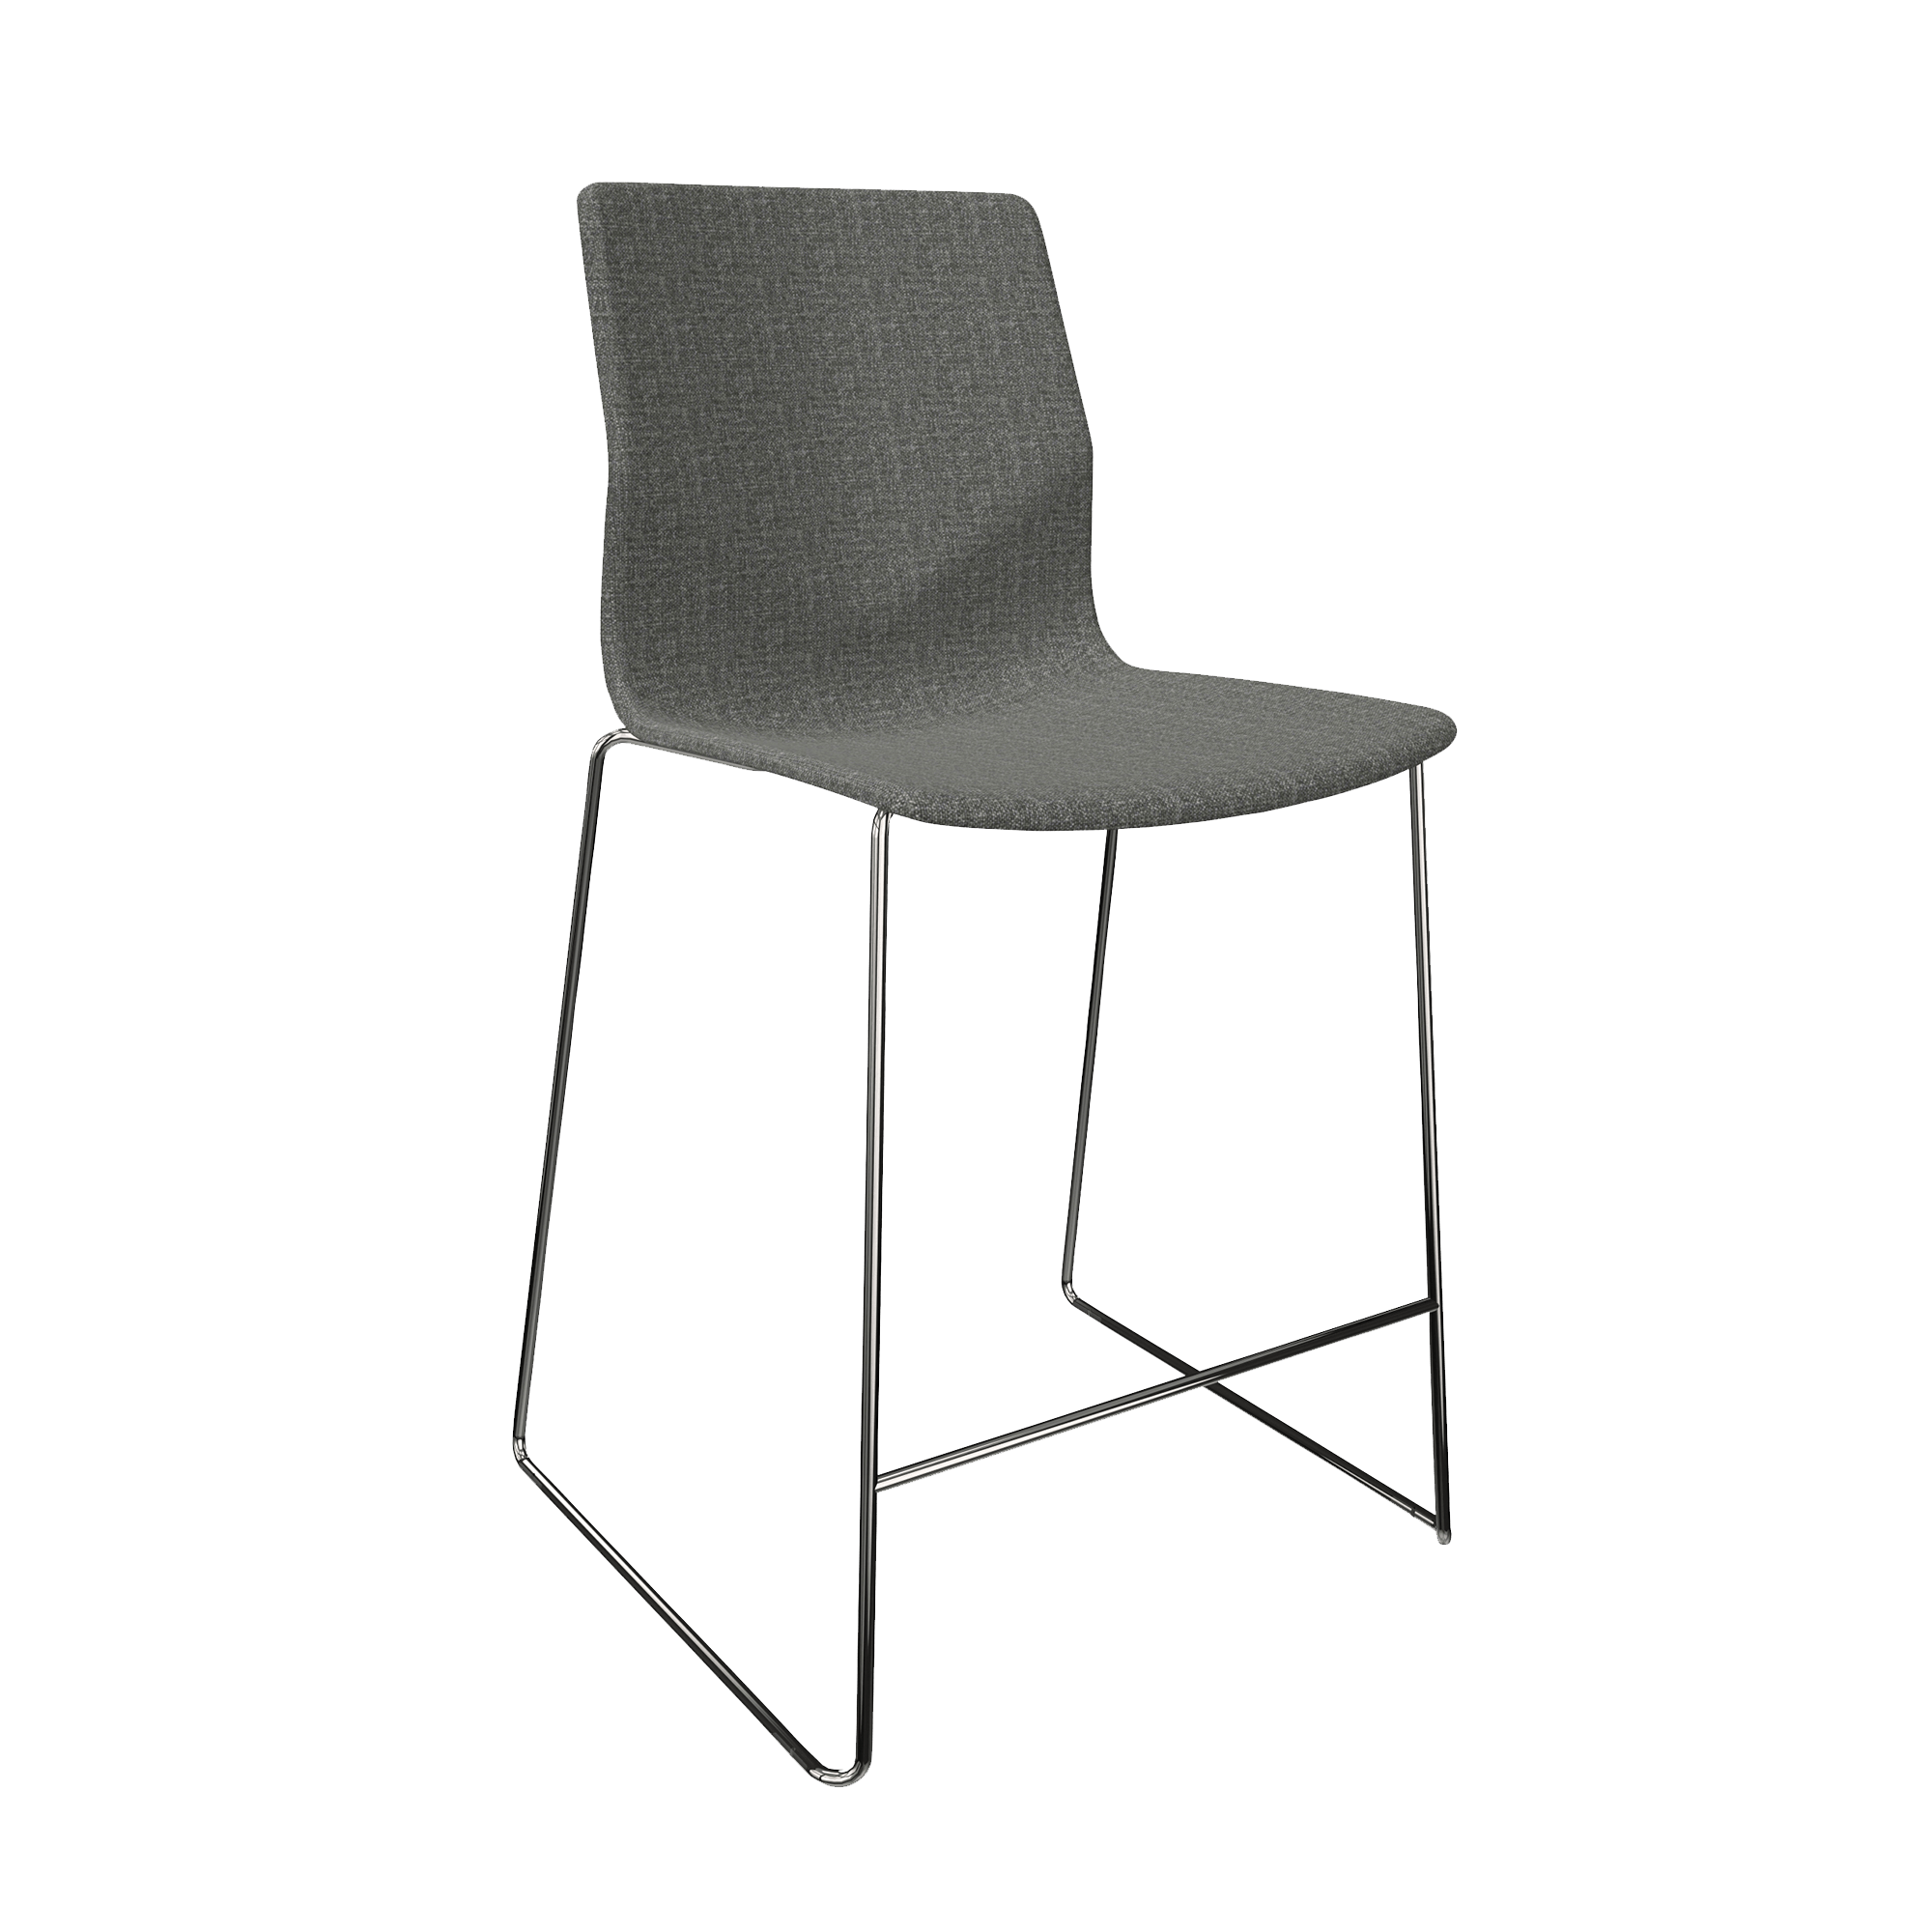 A grey mid height counter chair with 2 chrome legs